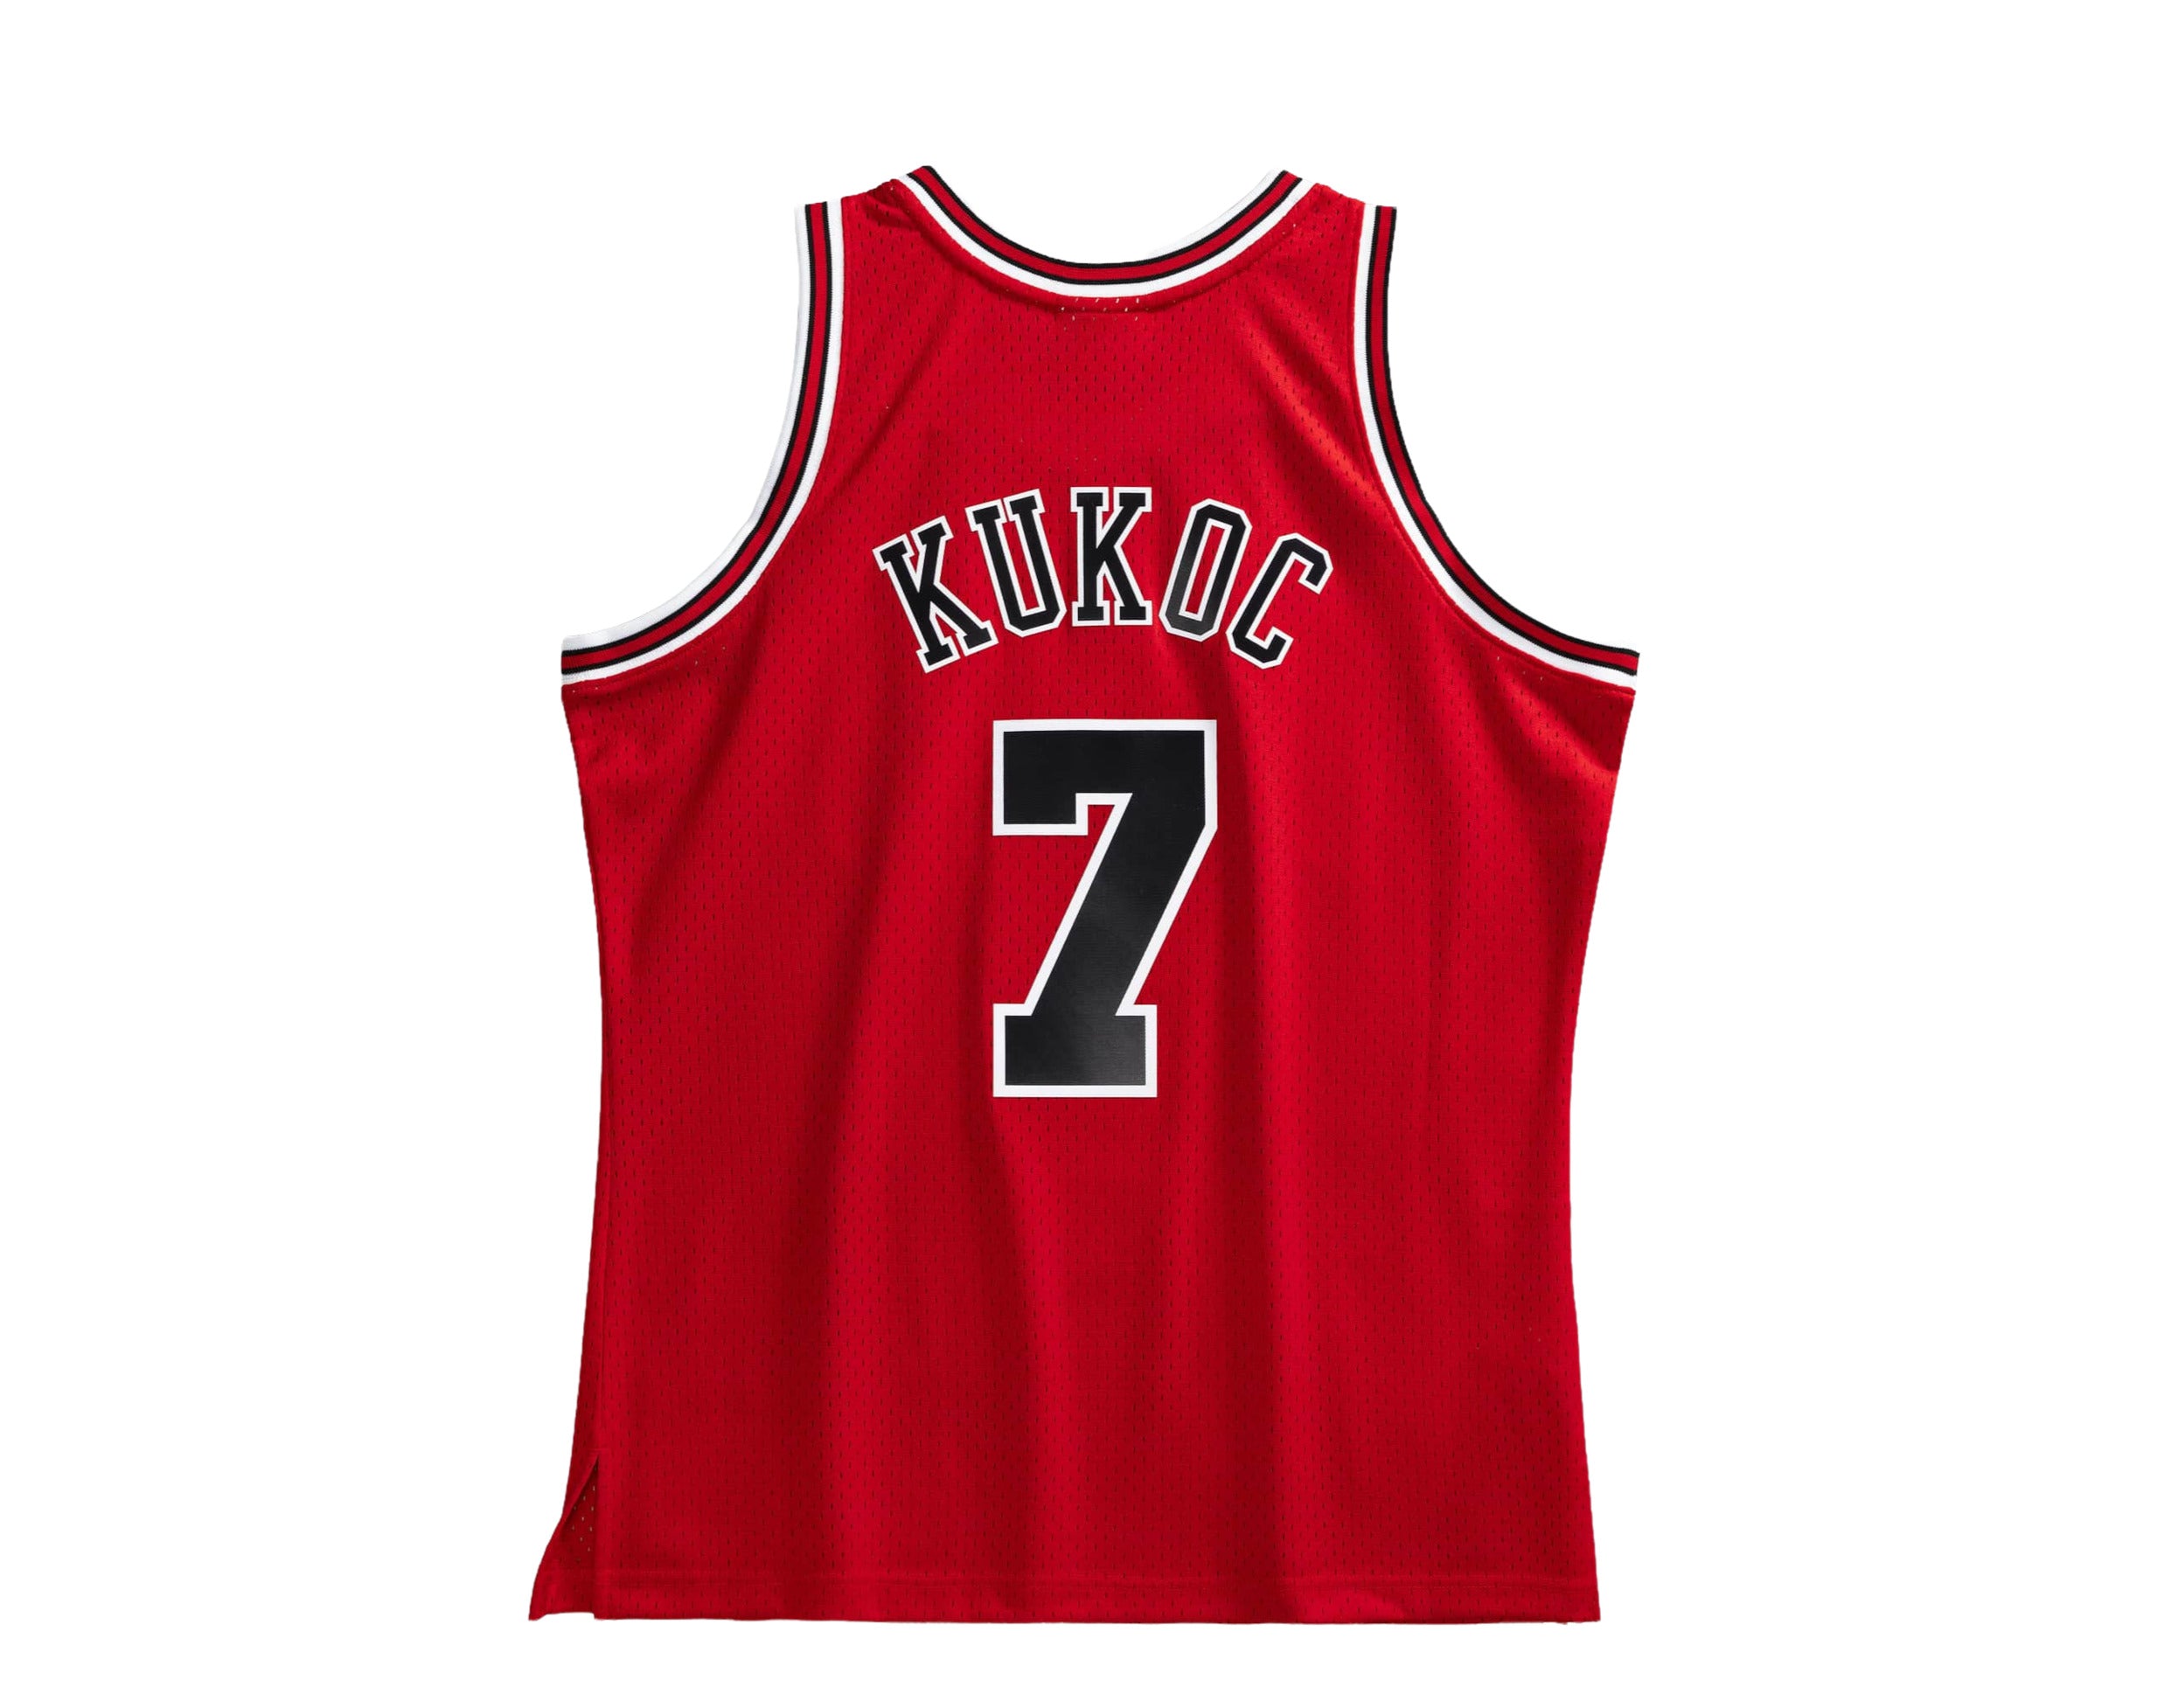 New new new! Revenge Toronto Raptors Jersey available at The Store